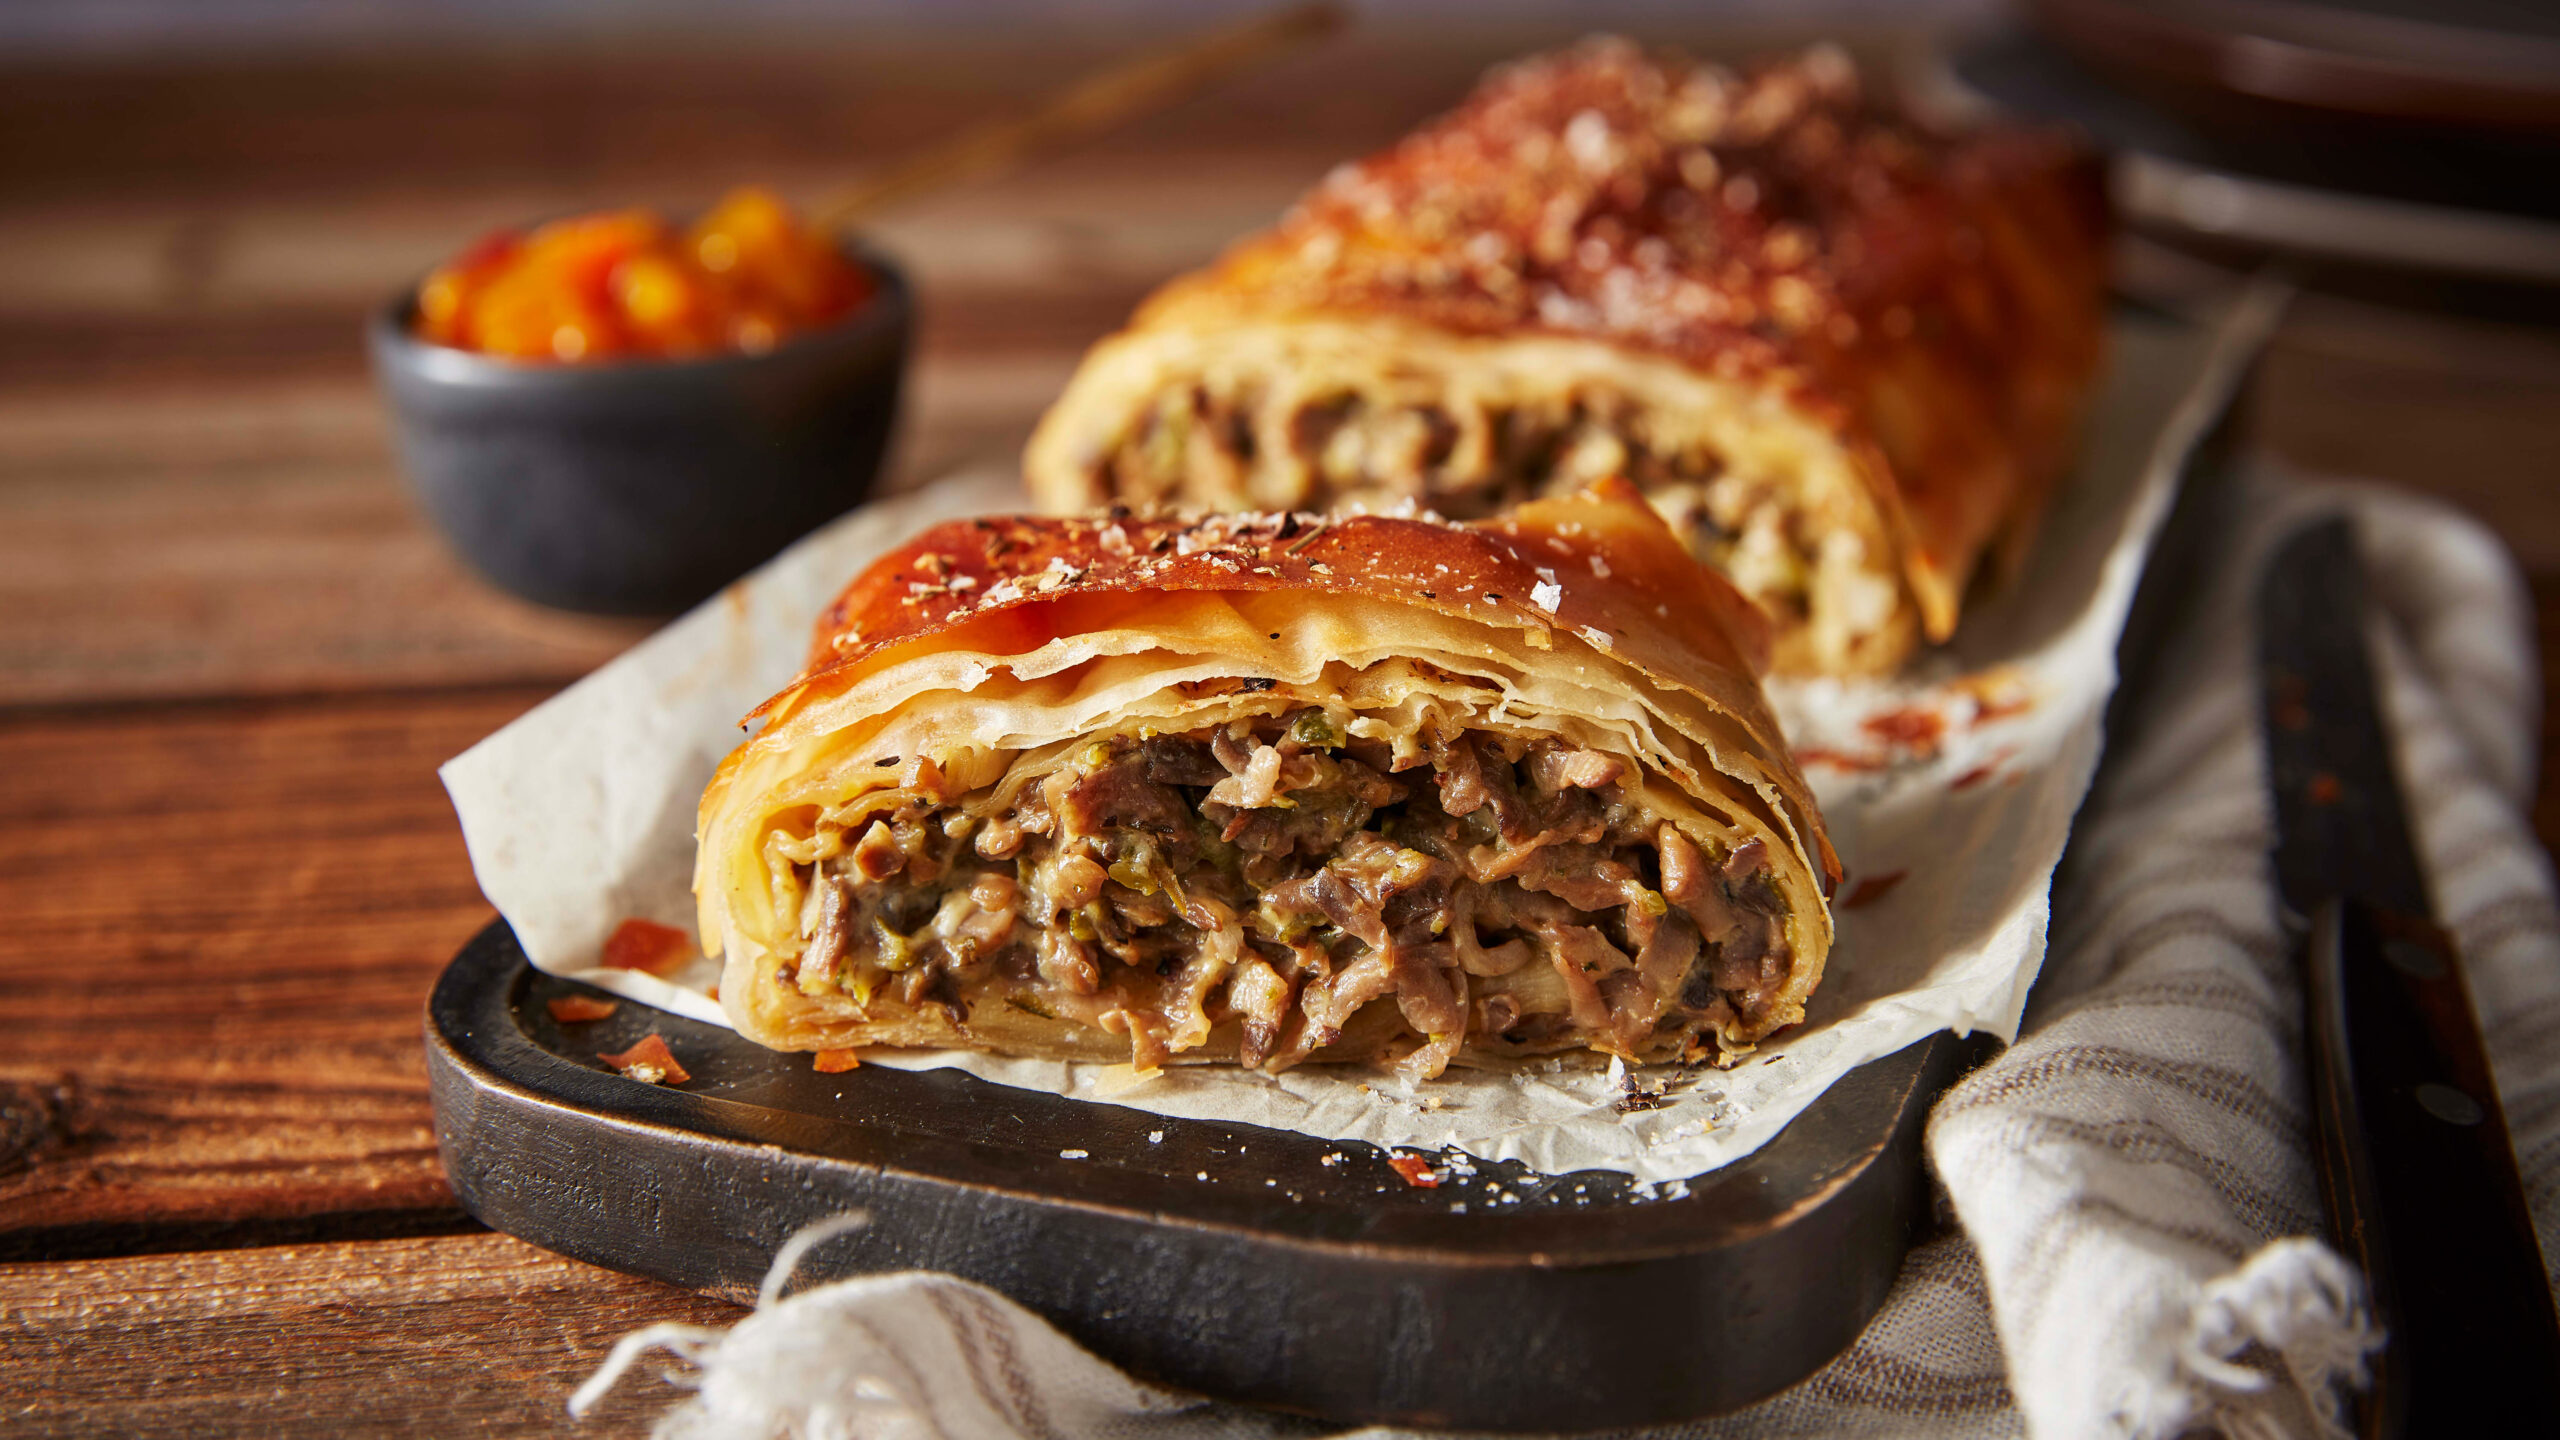 Mushroom and courgette strudel